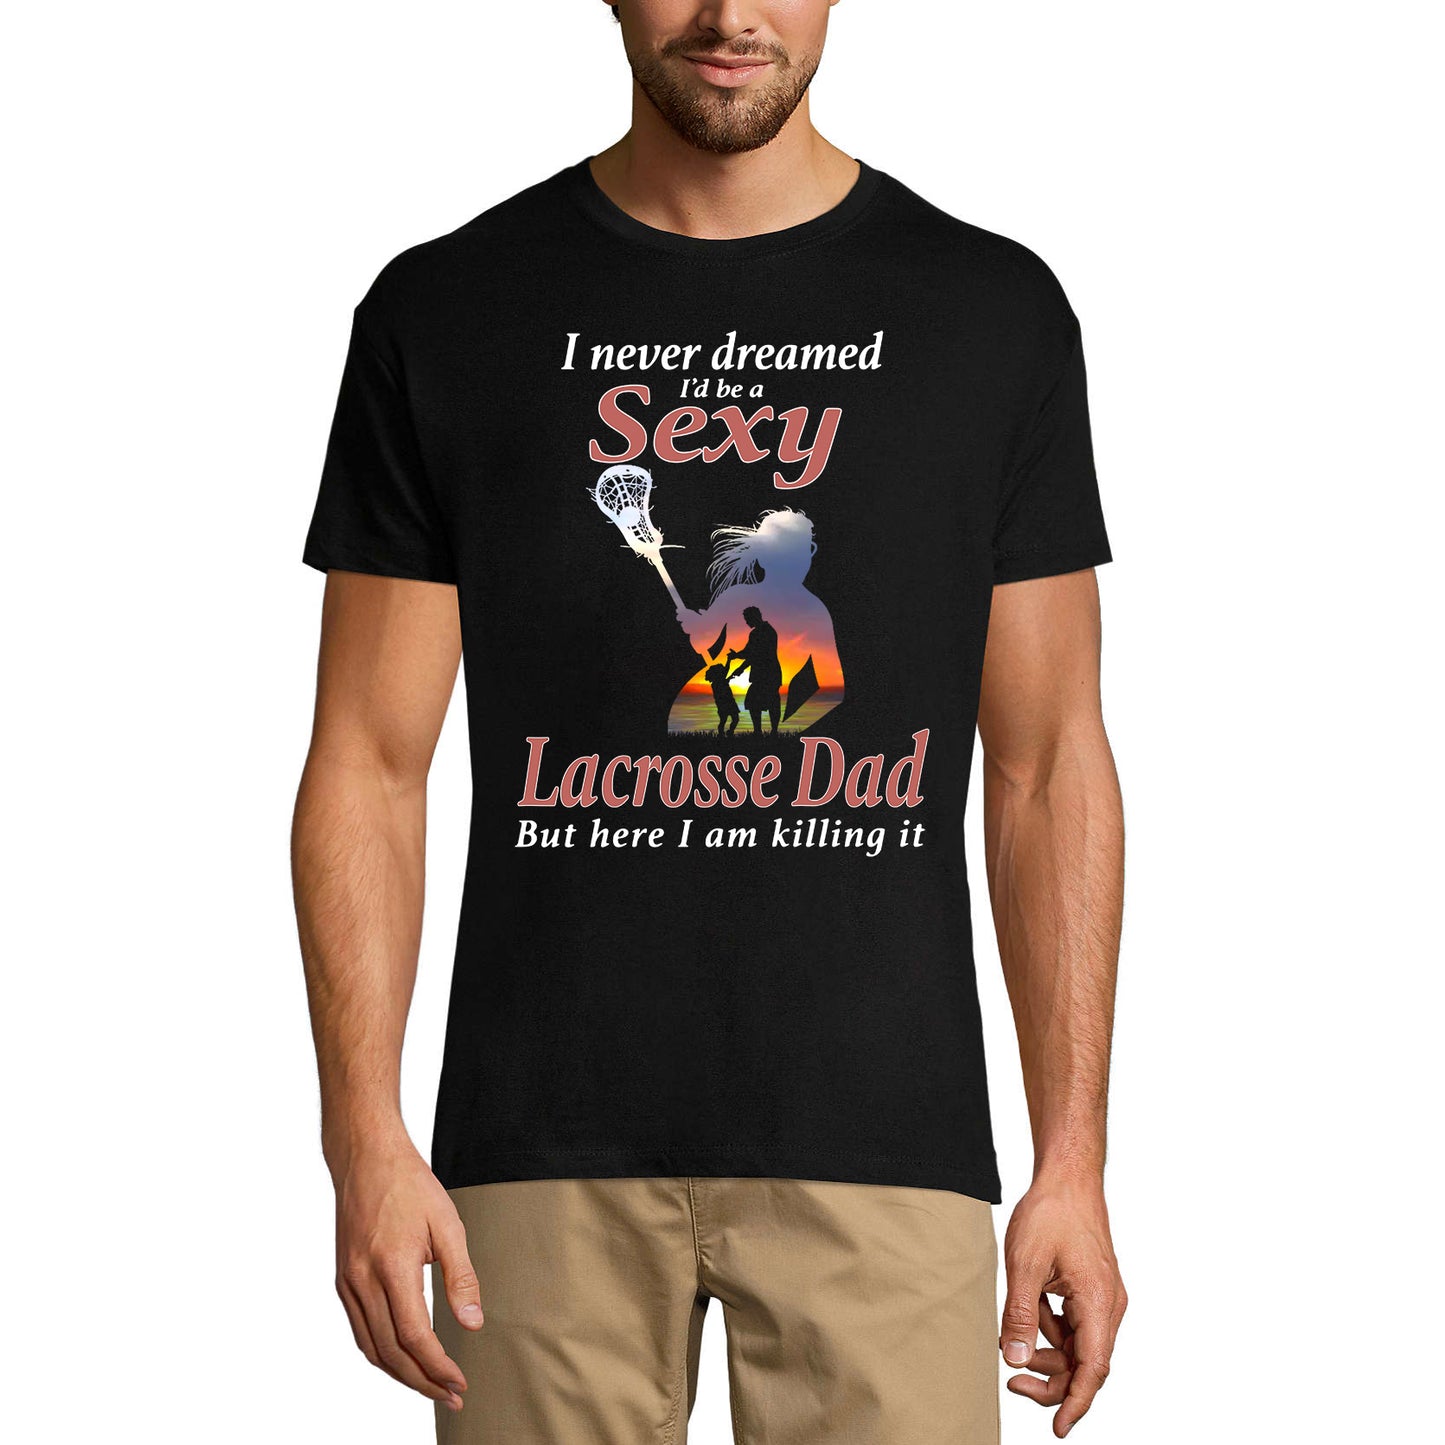 ULTRABASIC Men's Graphic T-Shirt I Never Dreamed I'd Be Sexy Lacrosse Dad - Daddy and Son